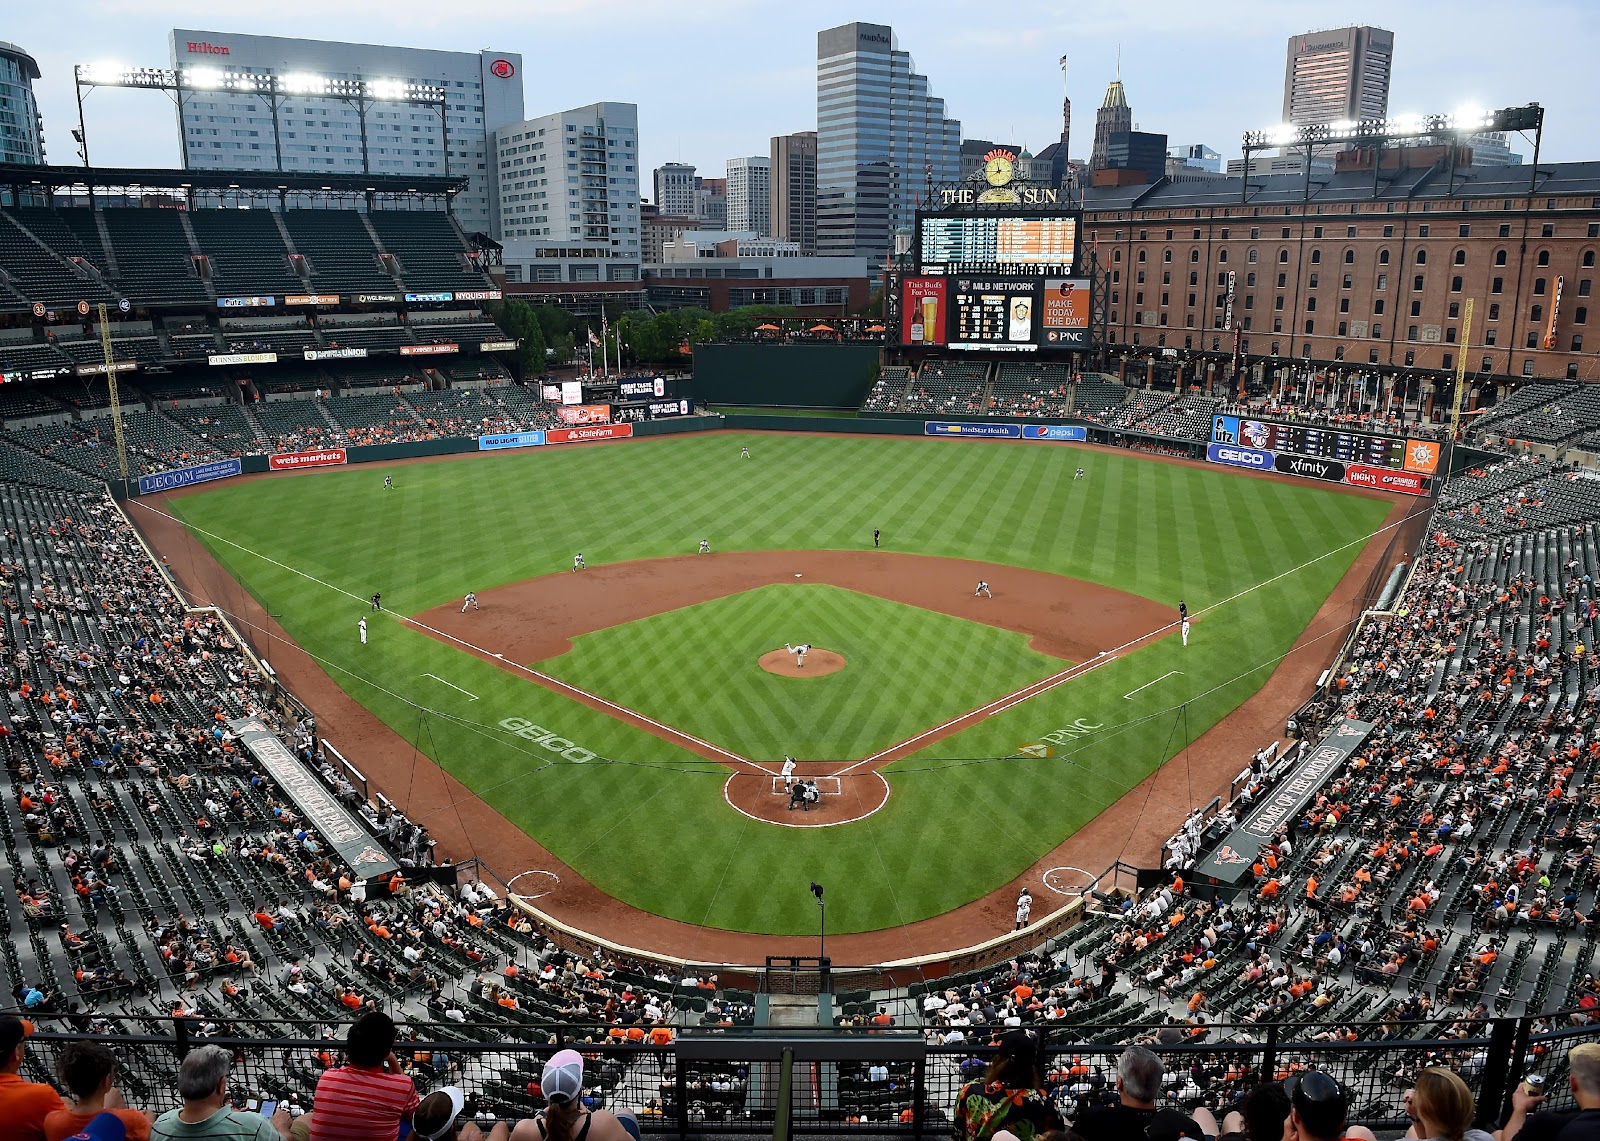 Oriole Park at Camden Yards in Baltimore, Maryland